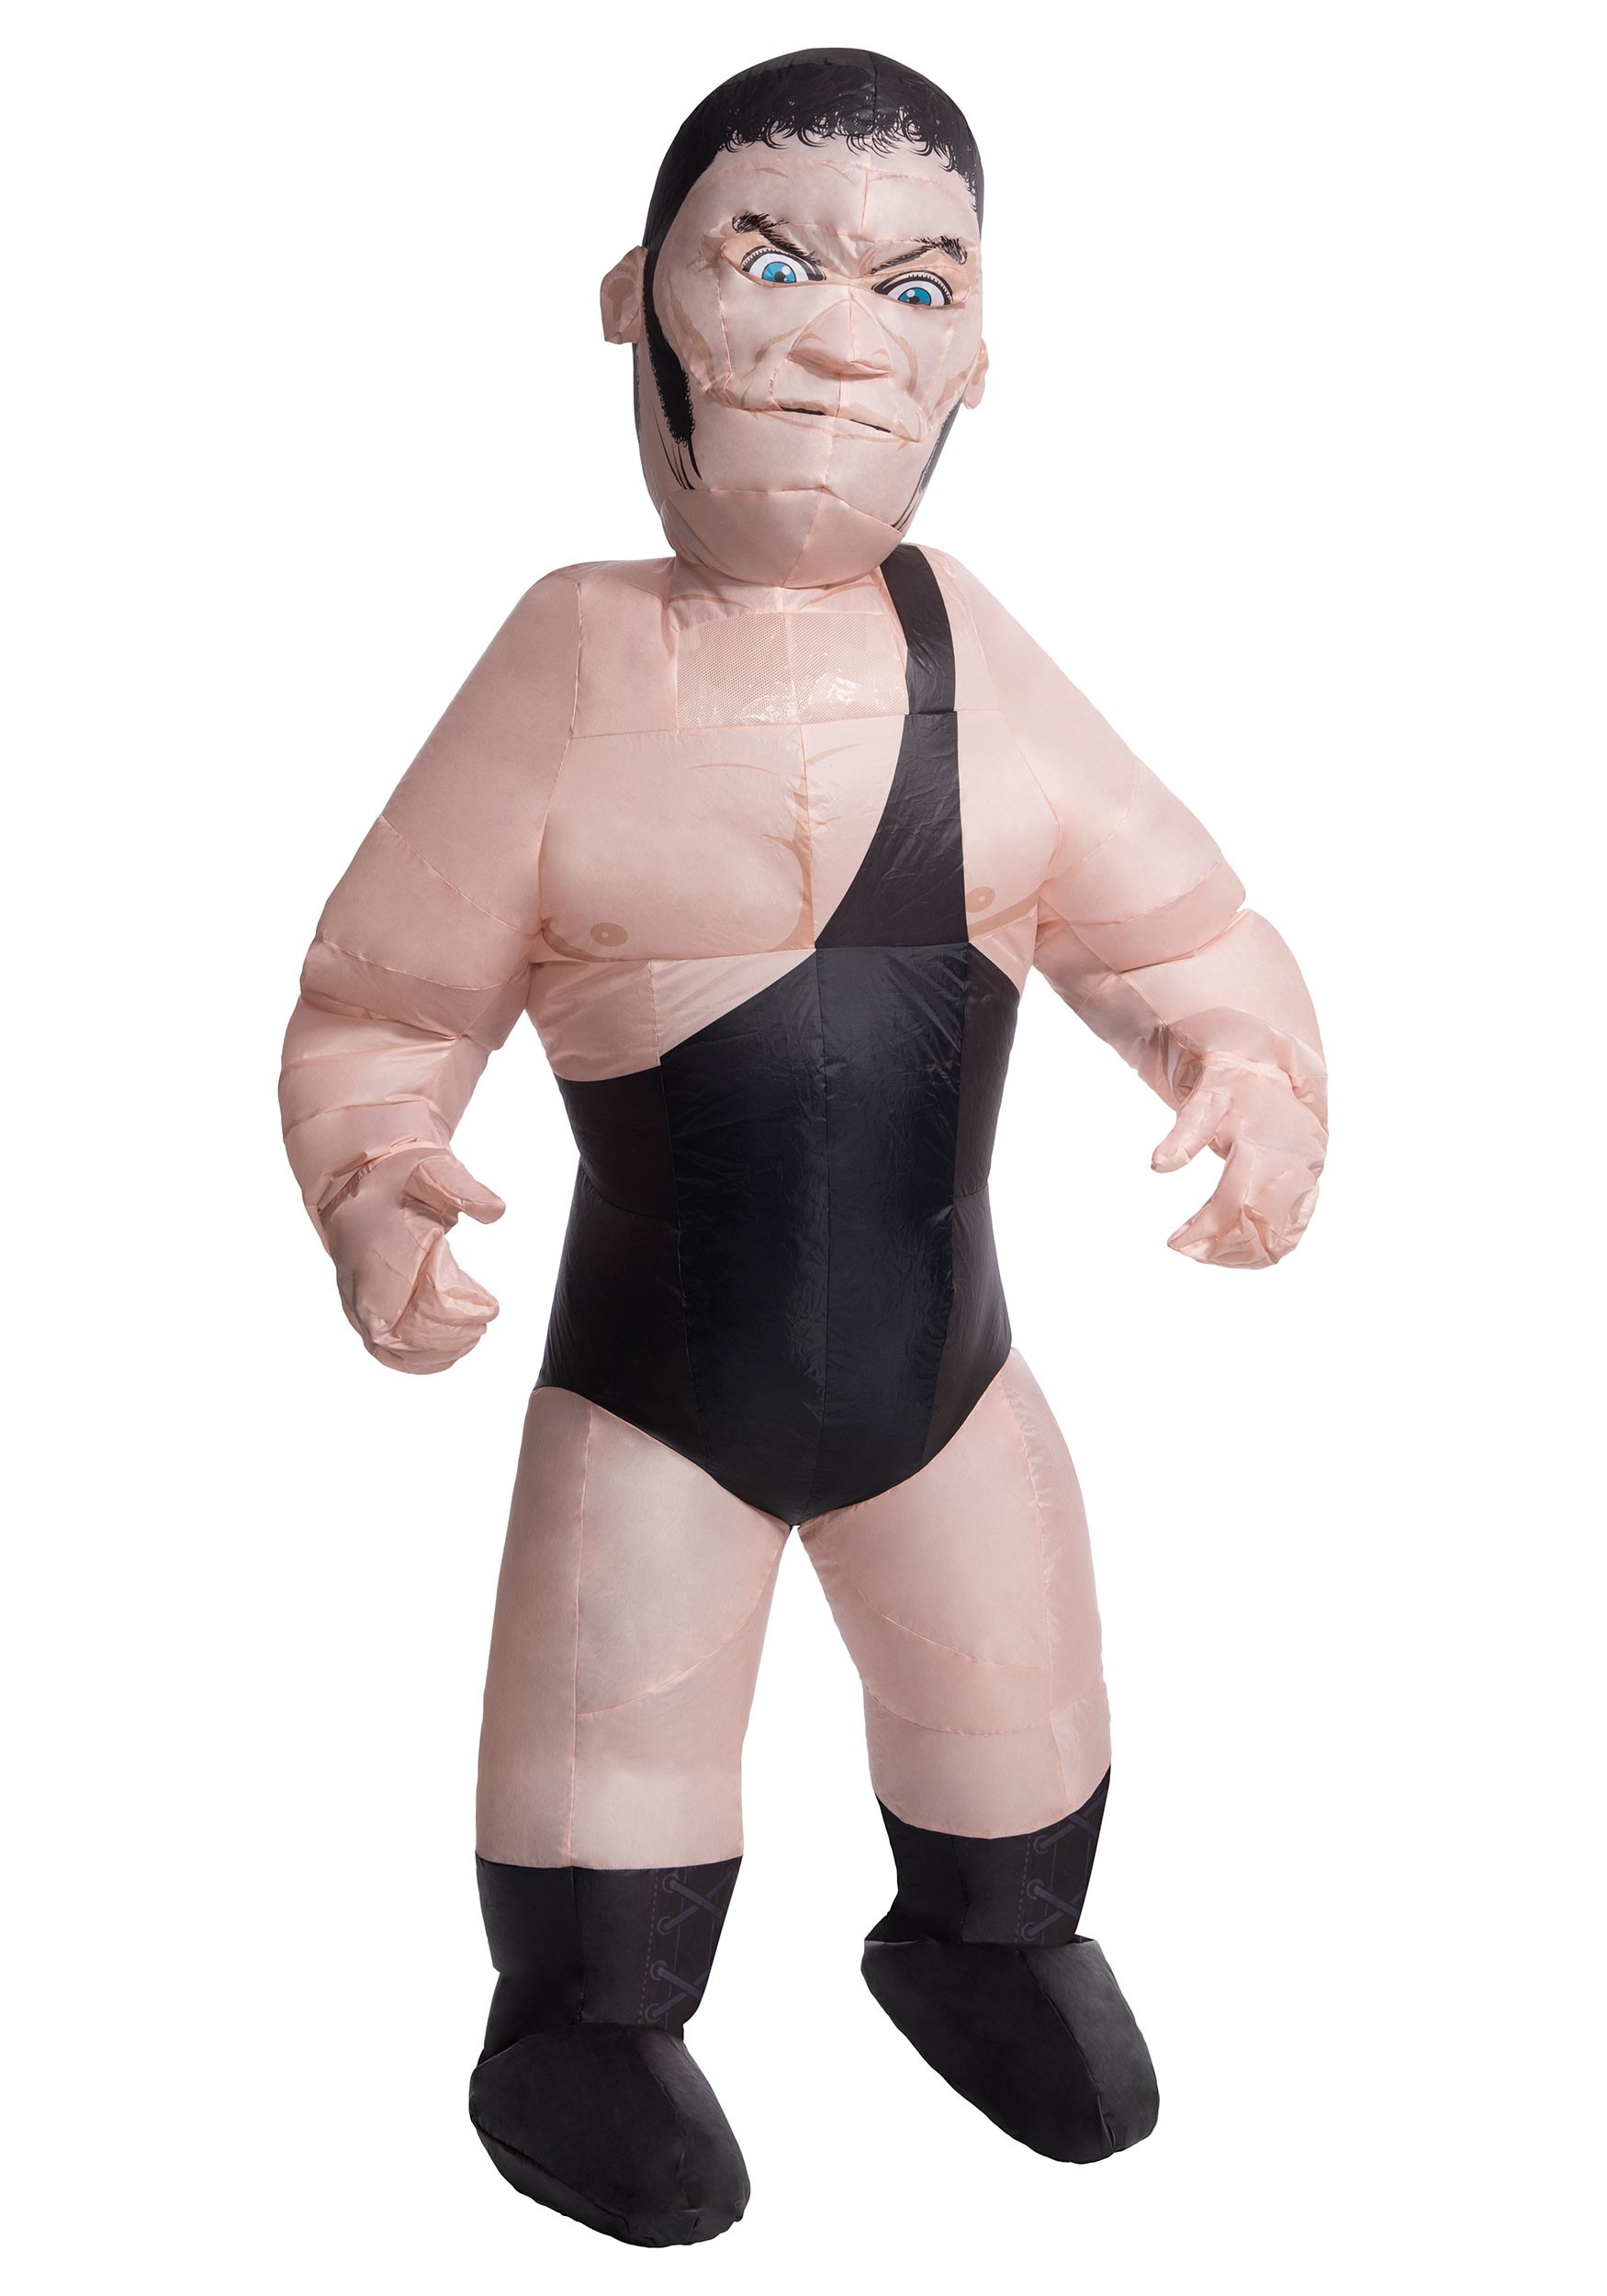 Andre the Giant - WWE Masters of the Universe 7 WWE Toy Wrestling Action  Figure by Mattel!